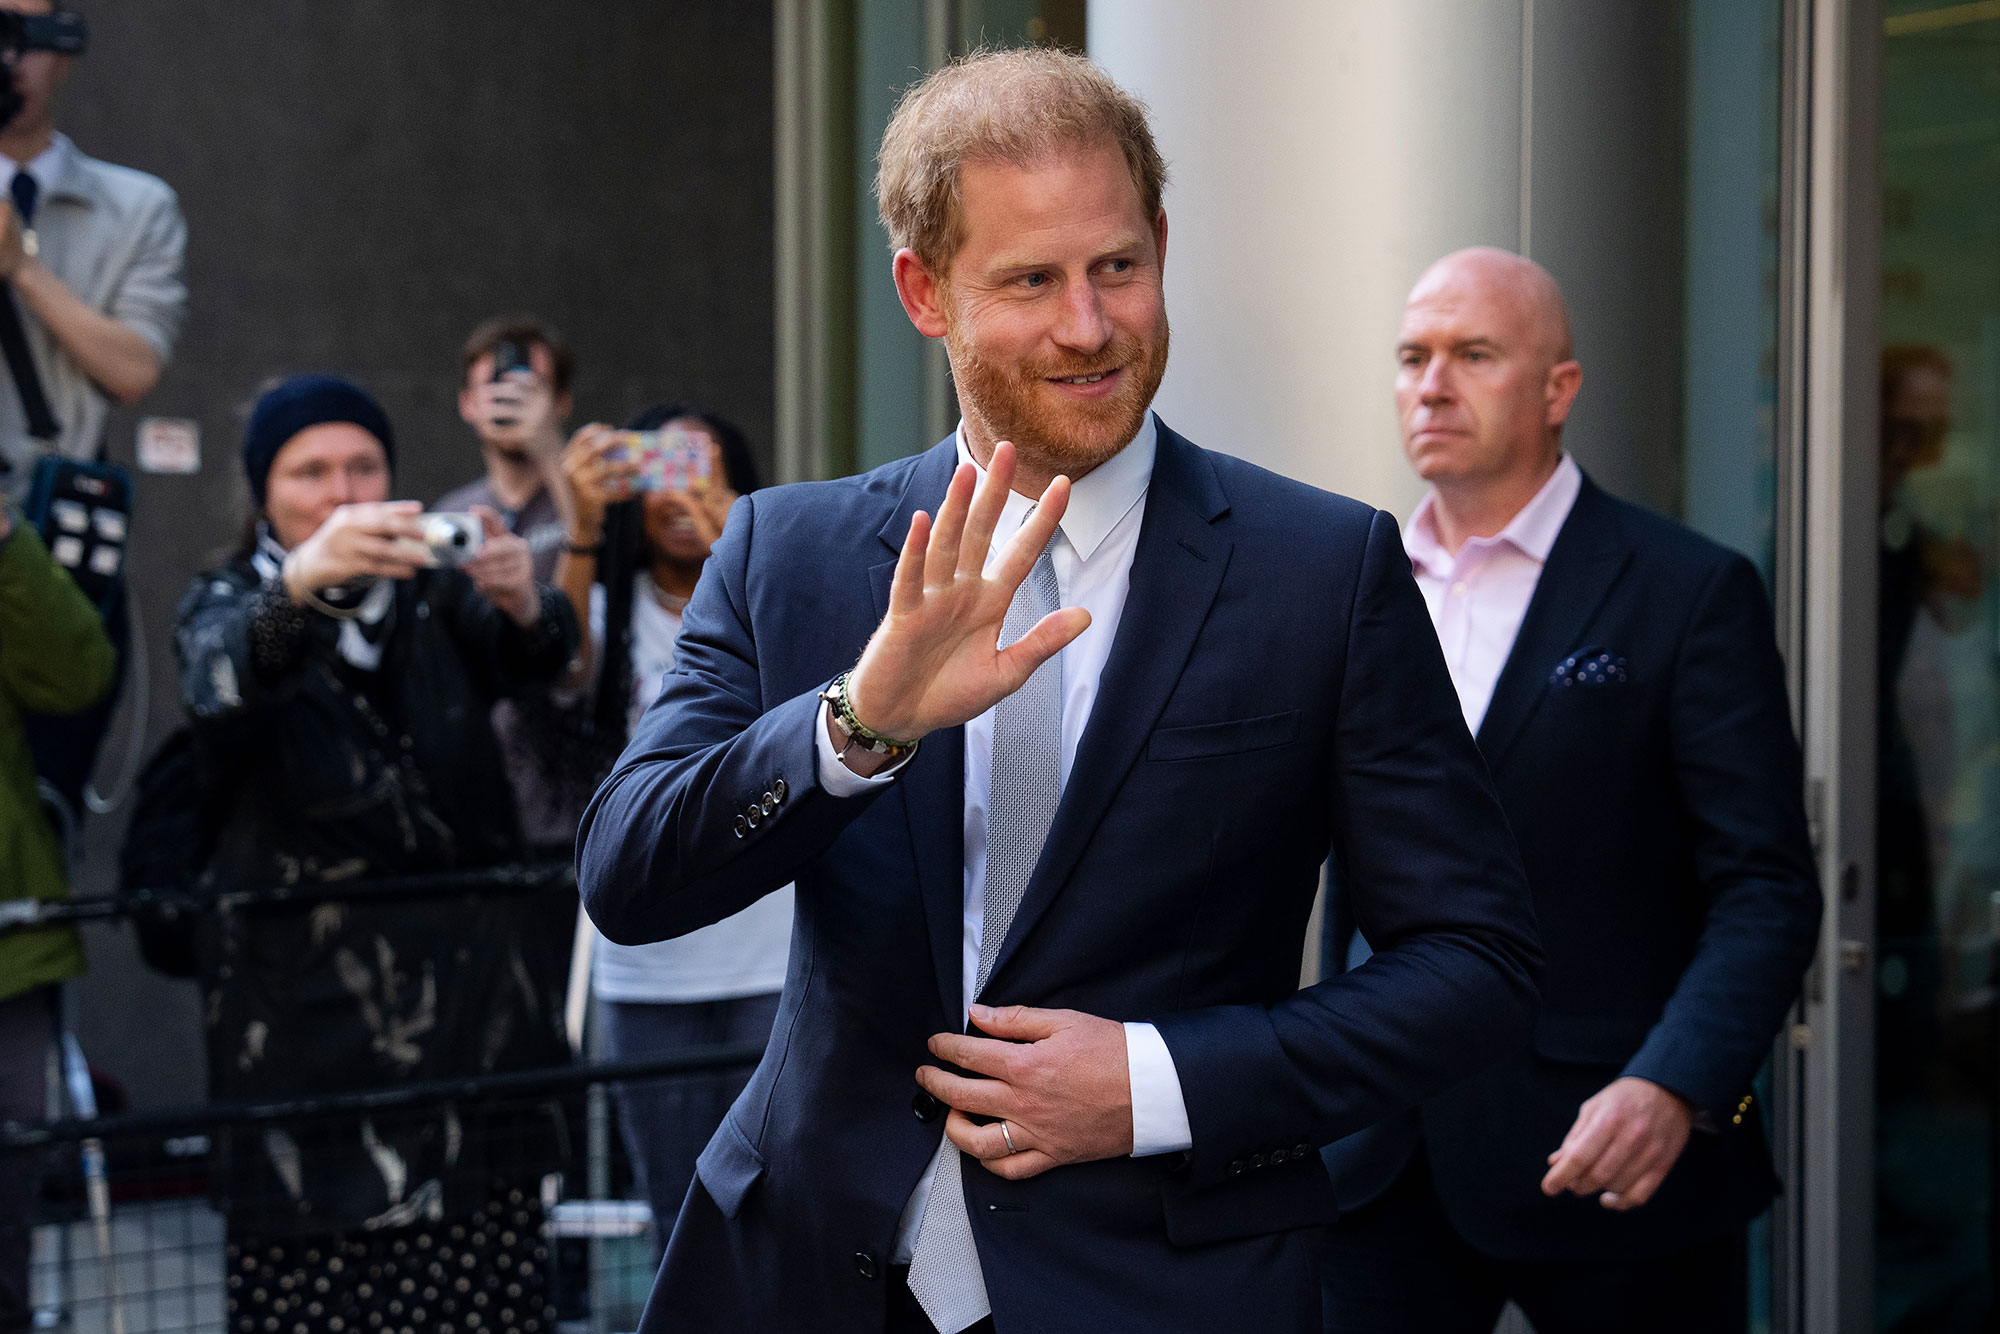 Read Prince Harry's Full Statement Reacting to Legal Victory in Phone  Hacking Case